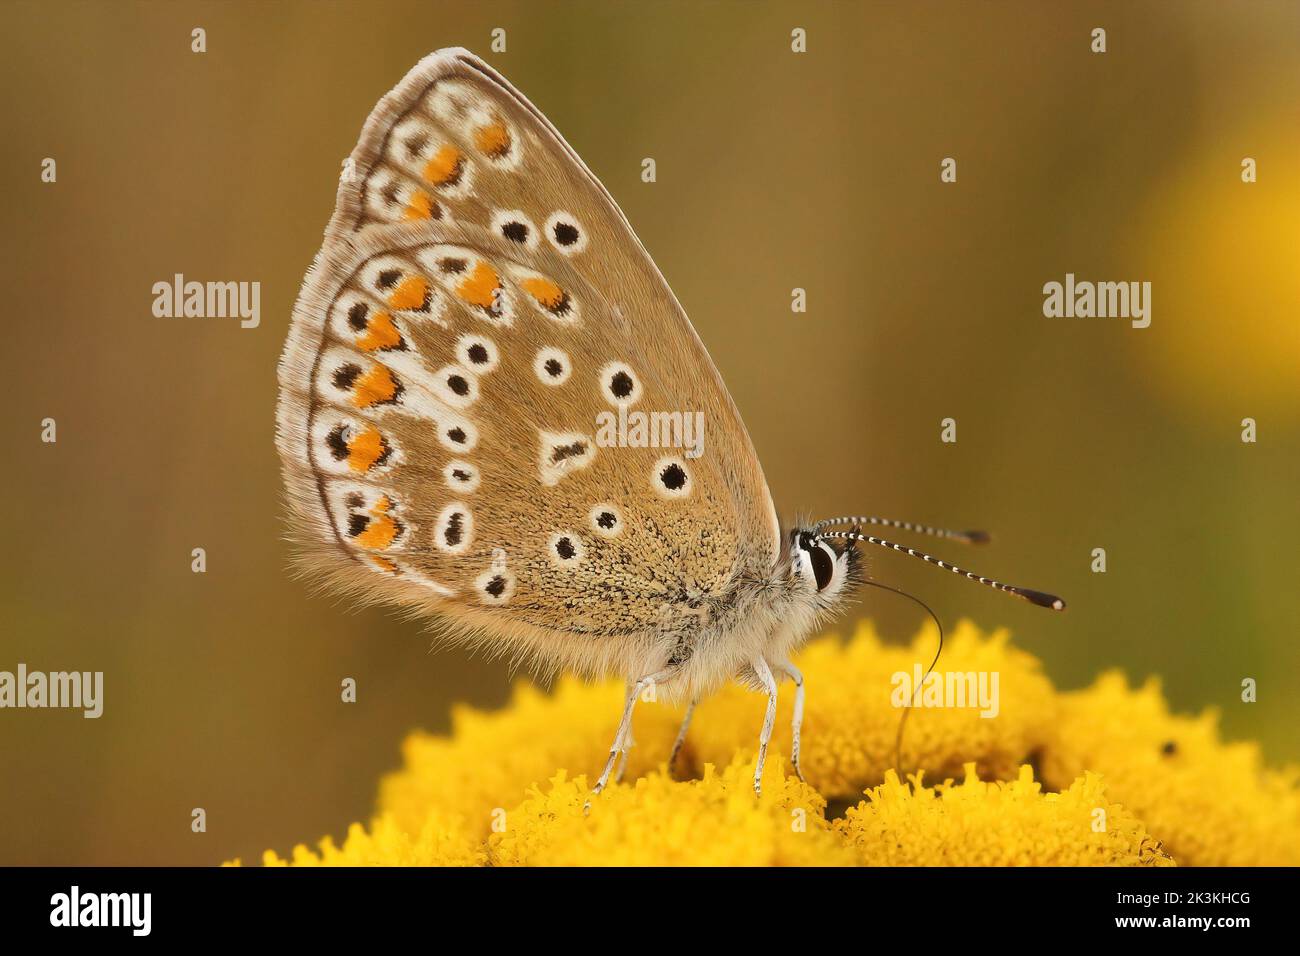 Closeup on a Common European Icarus blue butterfly, Polyommatus icarus in the field Stock Photo